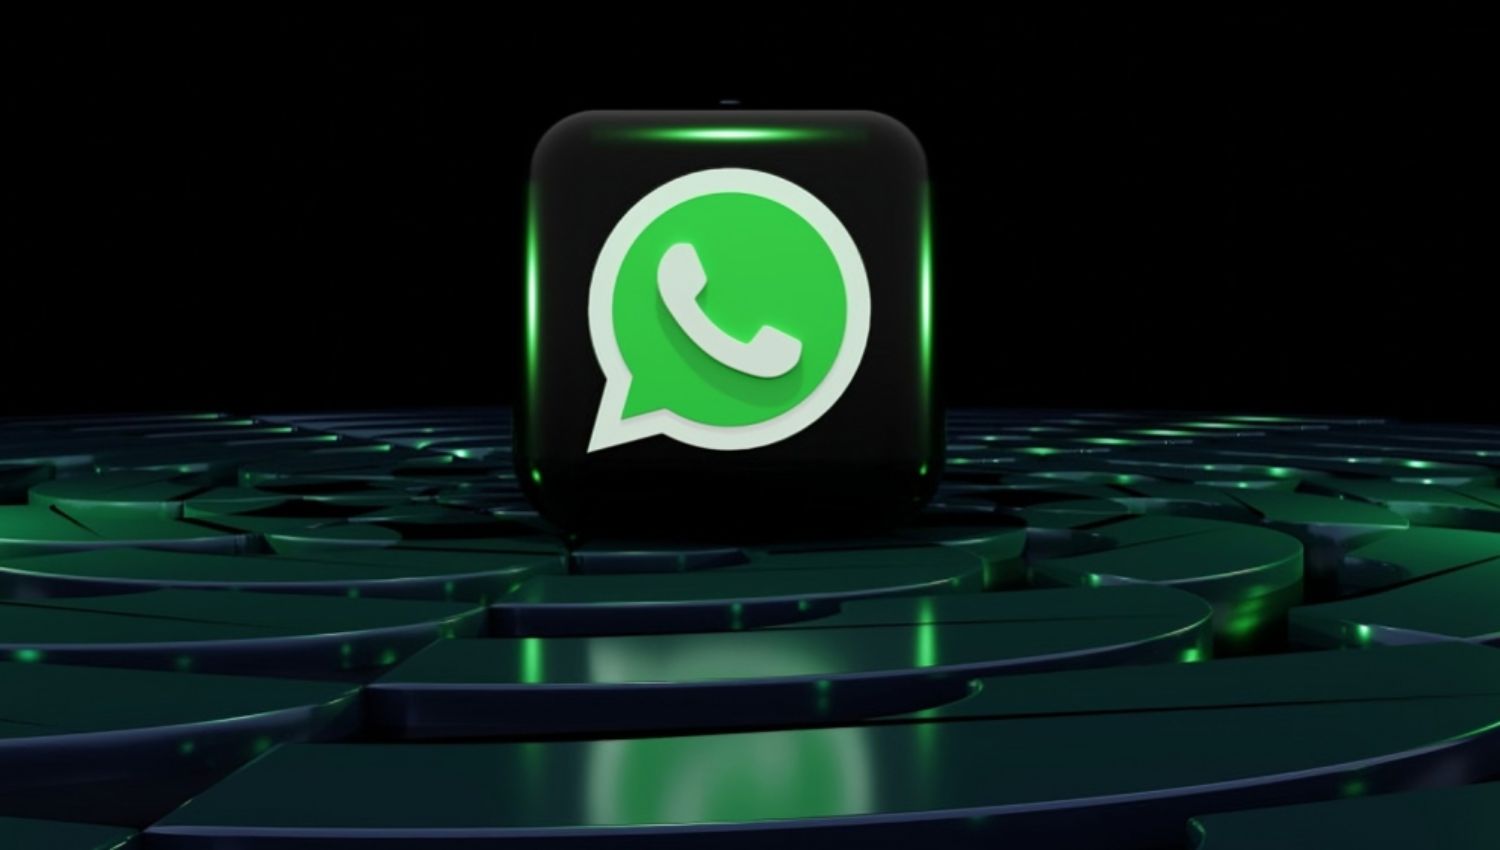 “WhatsApp Bans 7 Million Indian Users for Rule Violations, Warns of More to Follow”